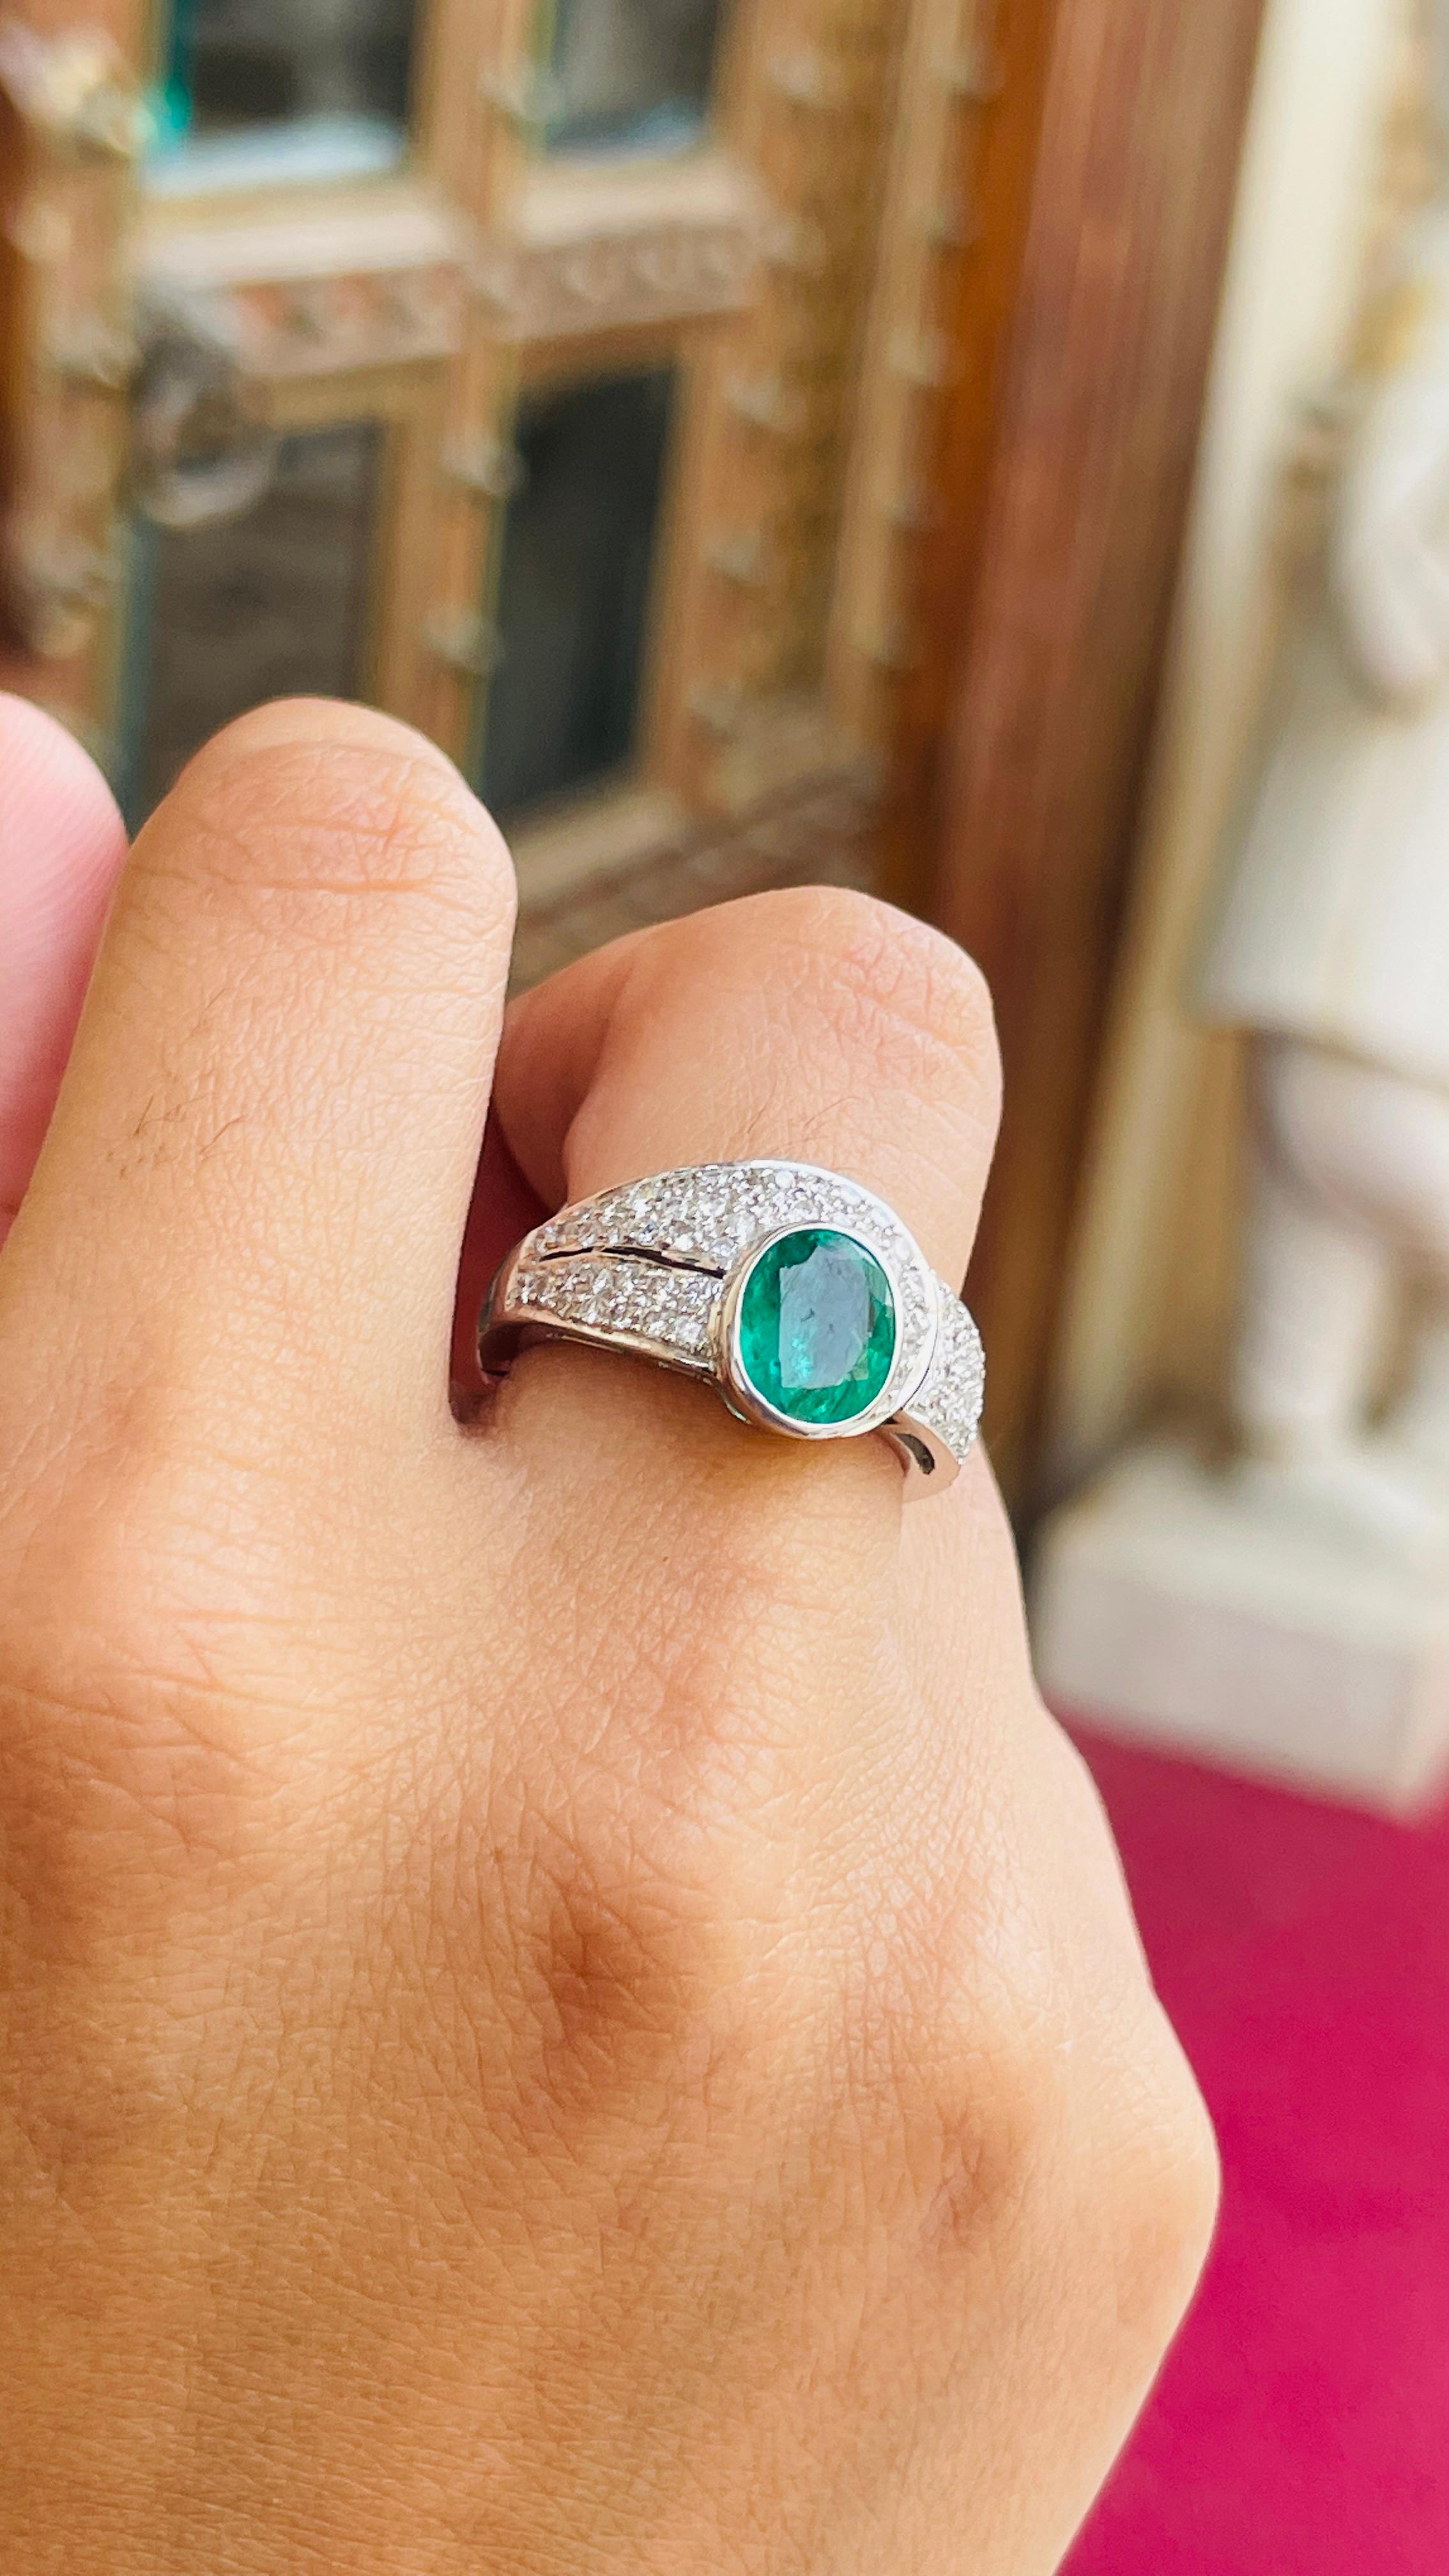 For Sale:  2.45 Carat Emerald and Diamond Ring in 18K White Gold  14